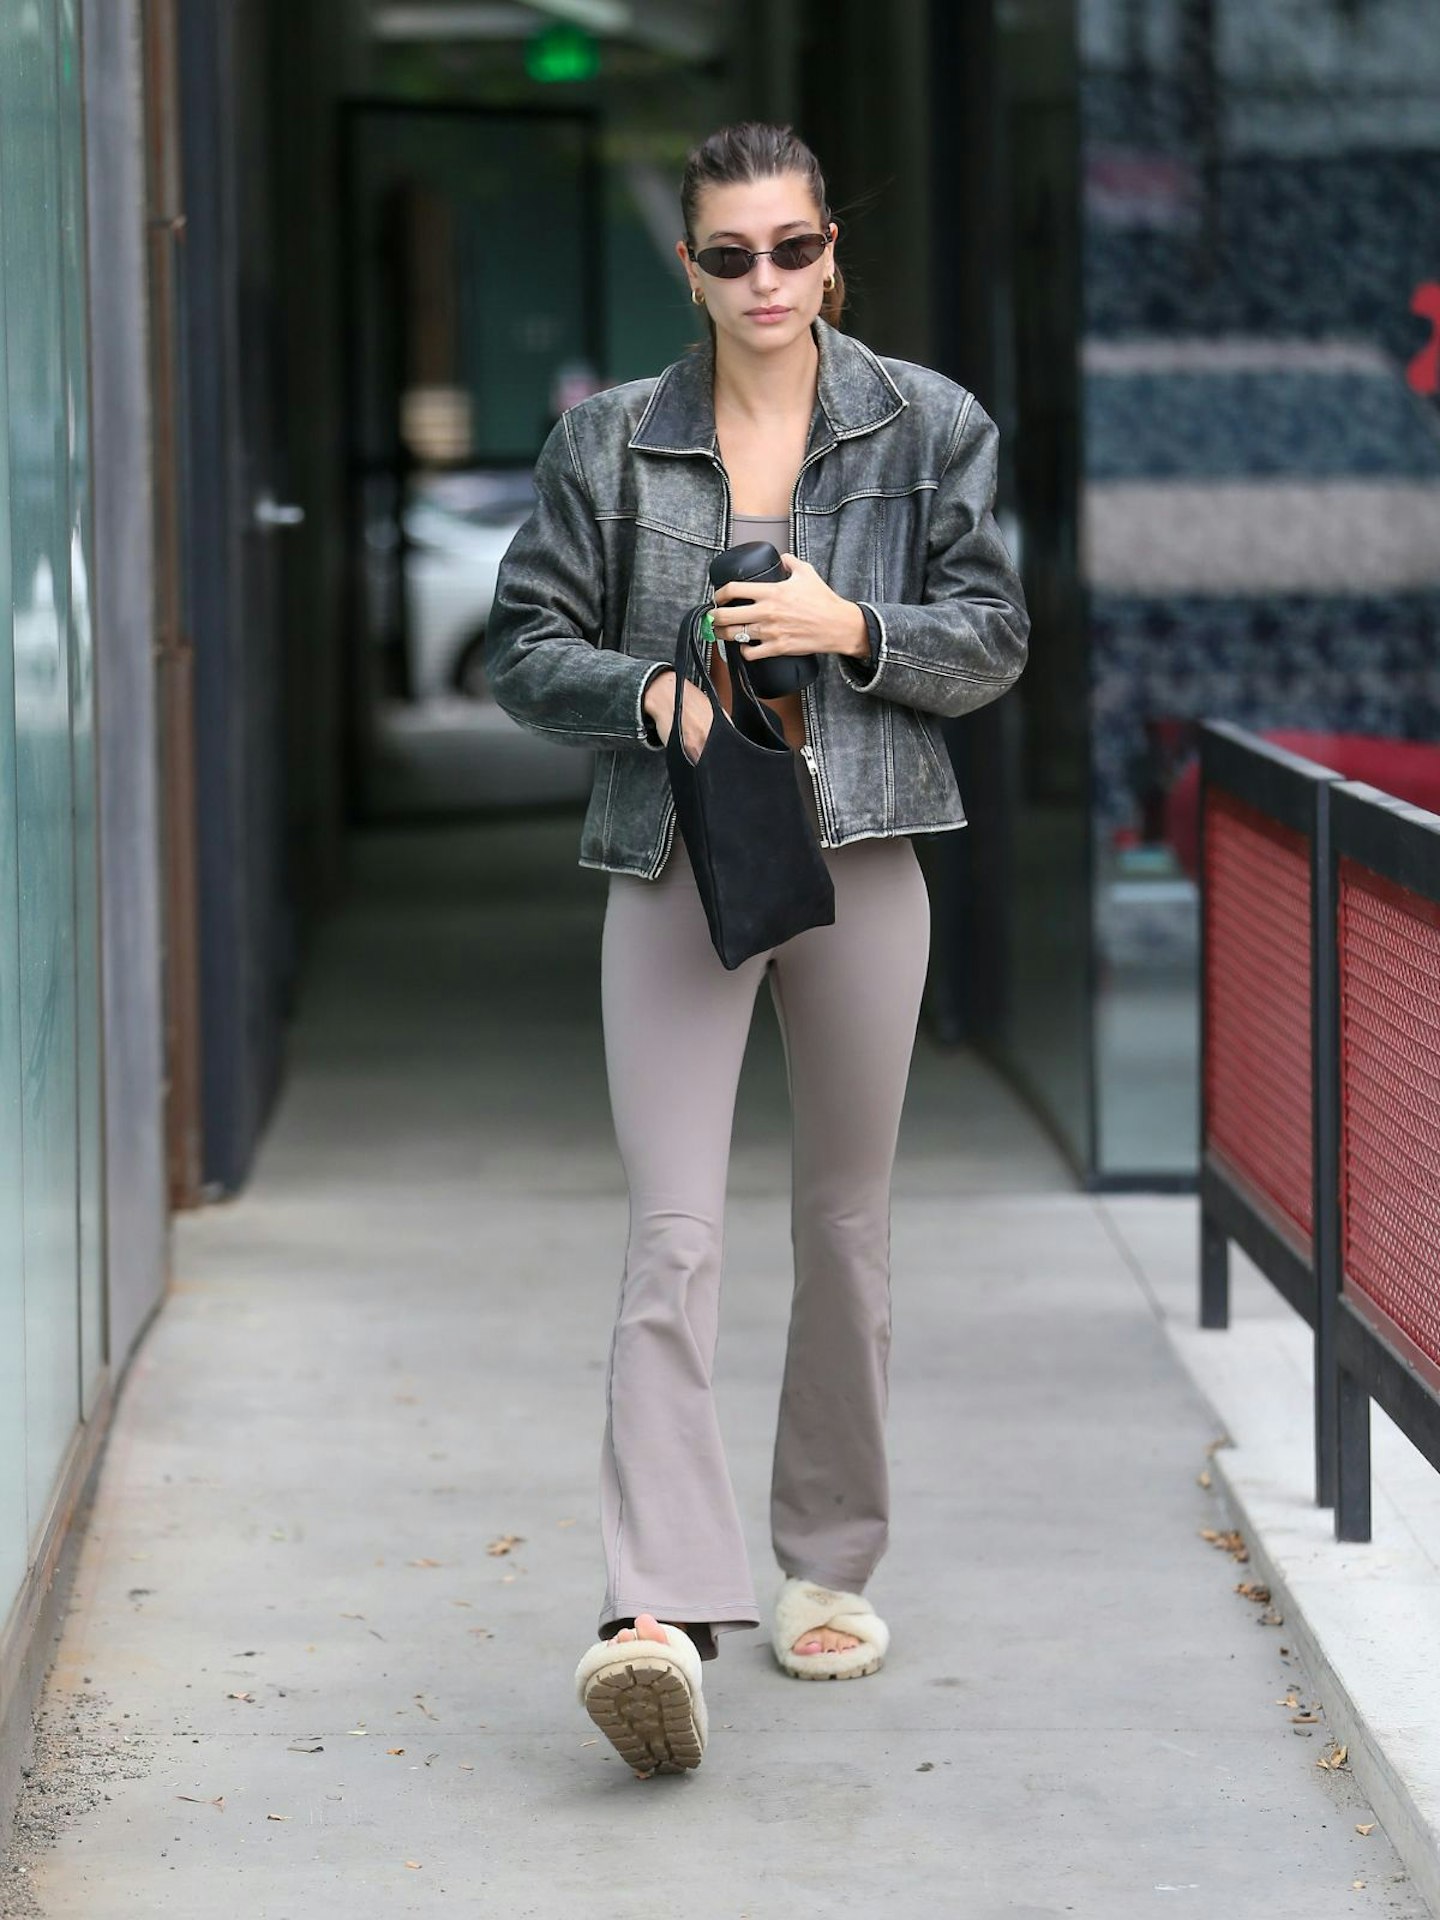 hailey bieber wearing flared leggings on getty images